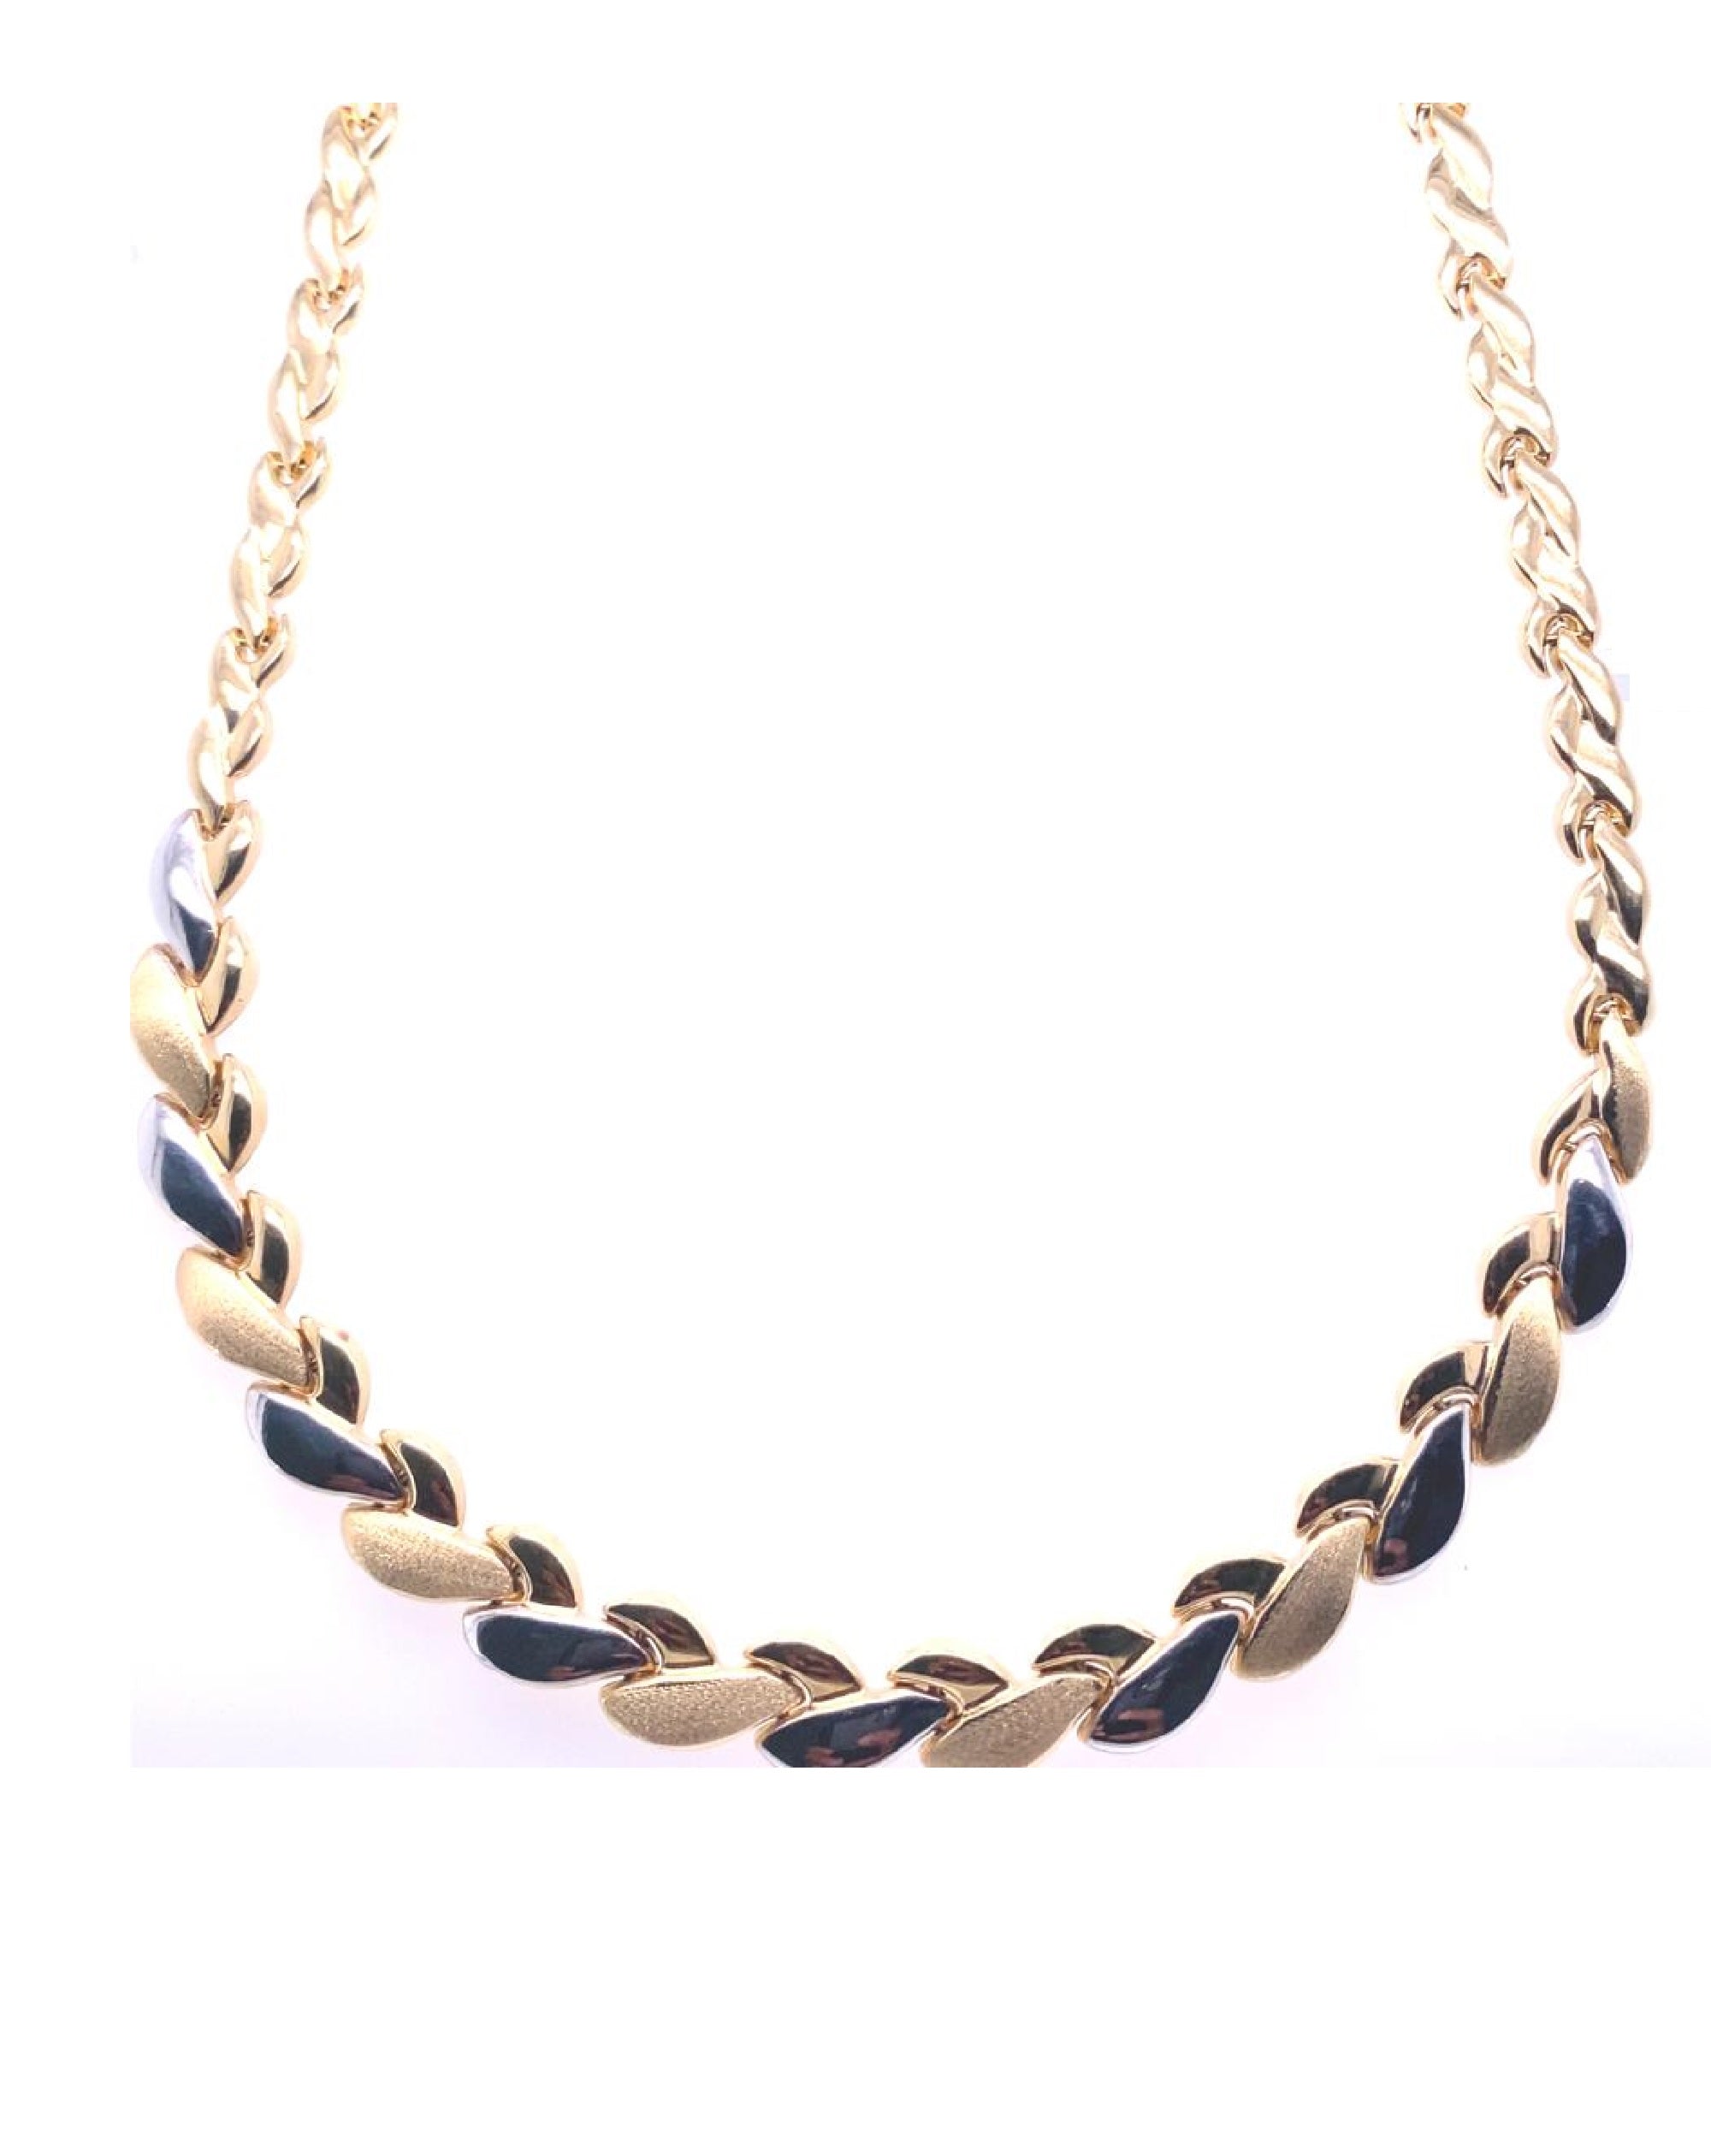 John Greed Fine Jewellery 9ct Gold Tri-Colour Entwined Ring Necklace